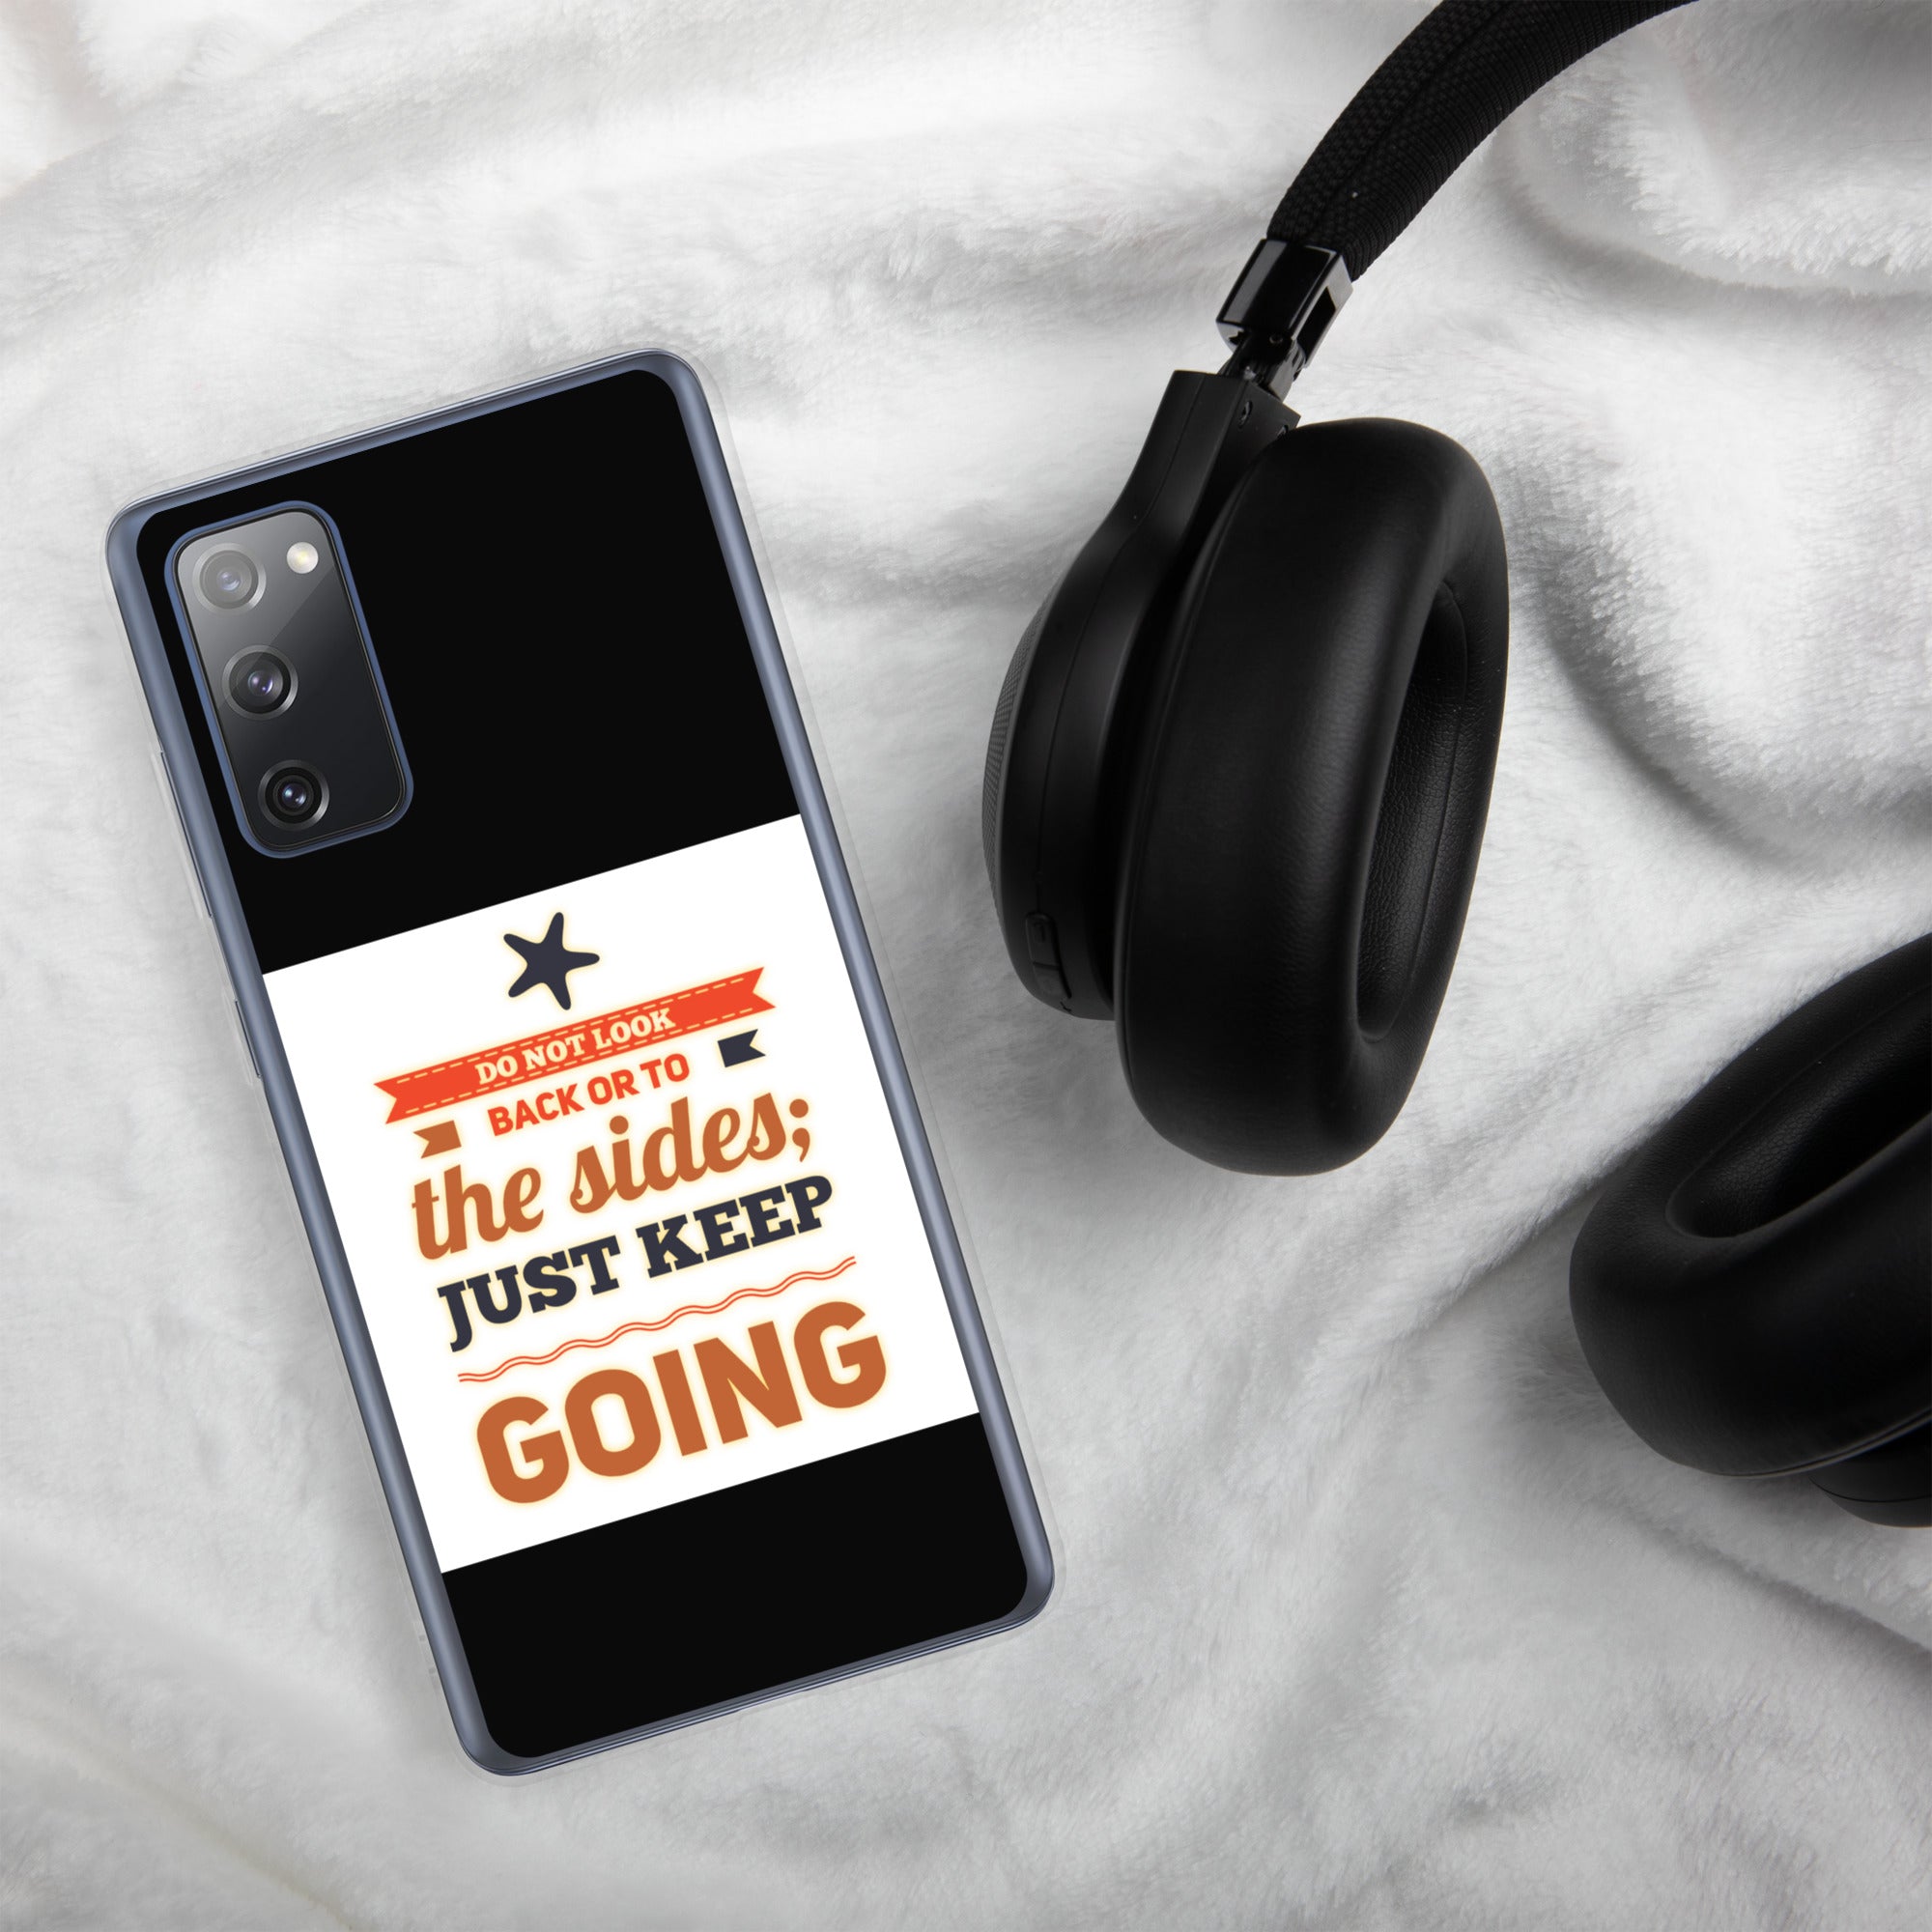 GloWell Designs - Samsung Case - Motivational Quote - Just Keep Going - GloWell Designs